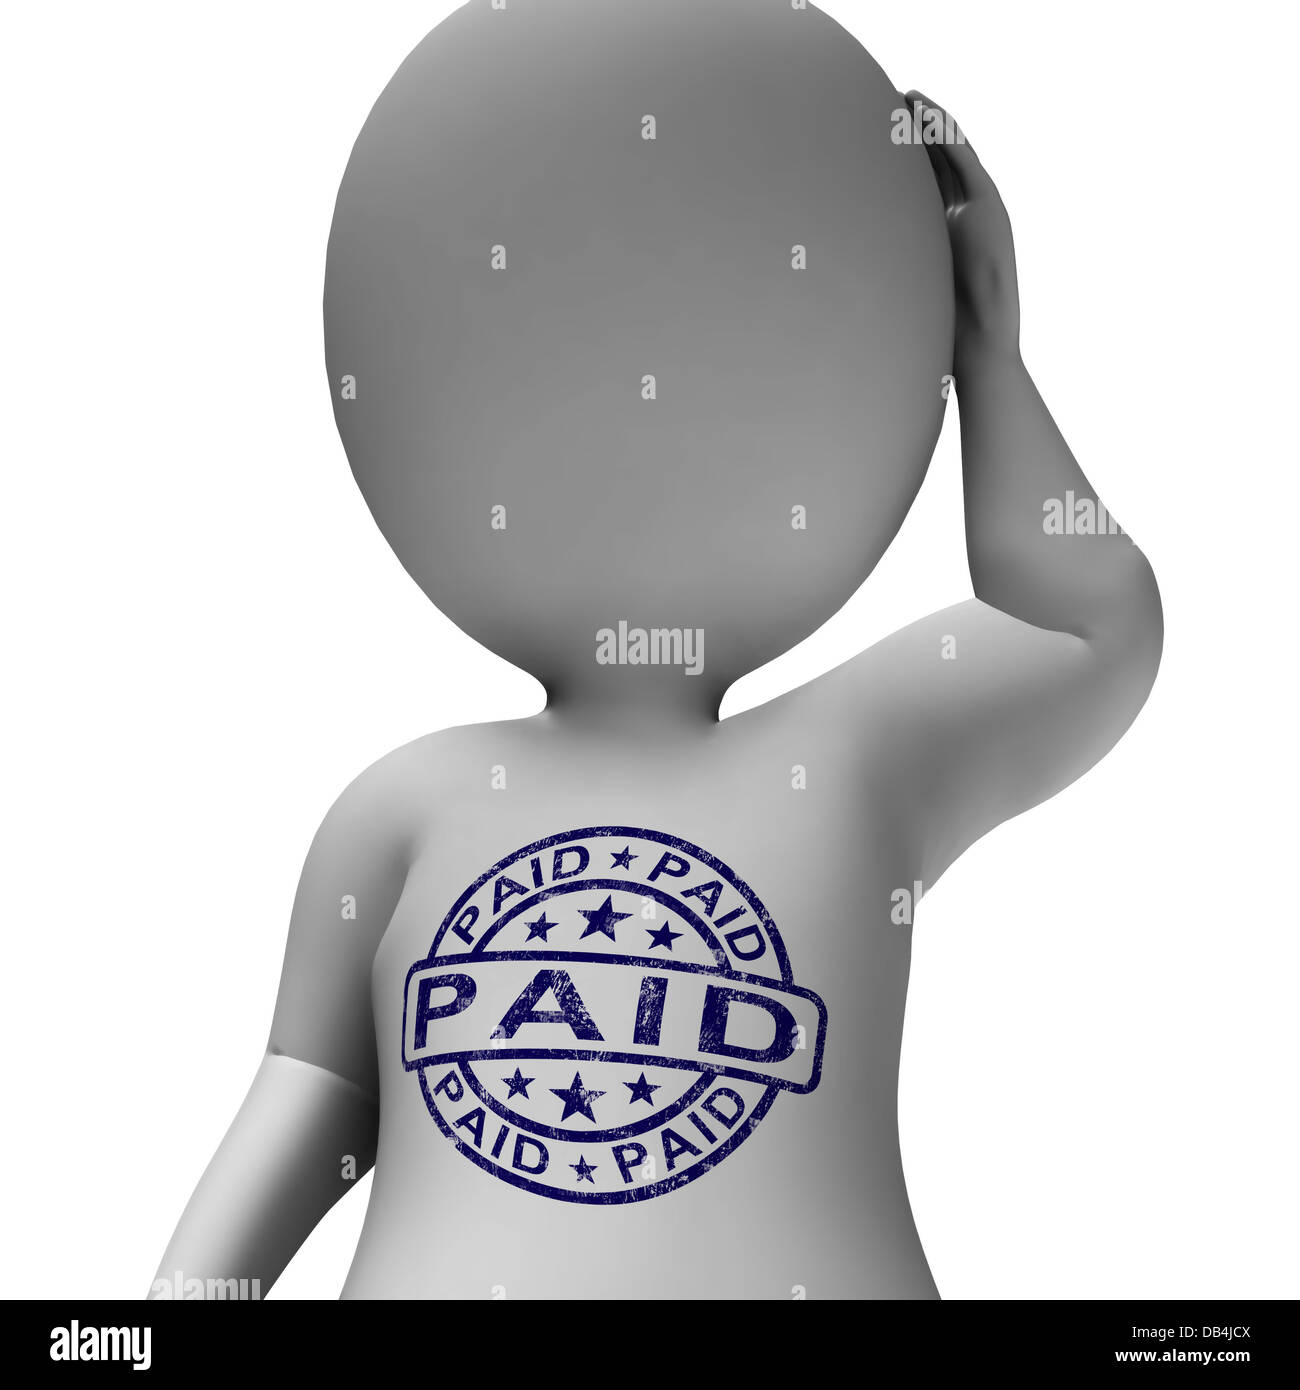 Paid Stamp On Man Showing Invoice Payment Confirmation Stock Photo